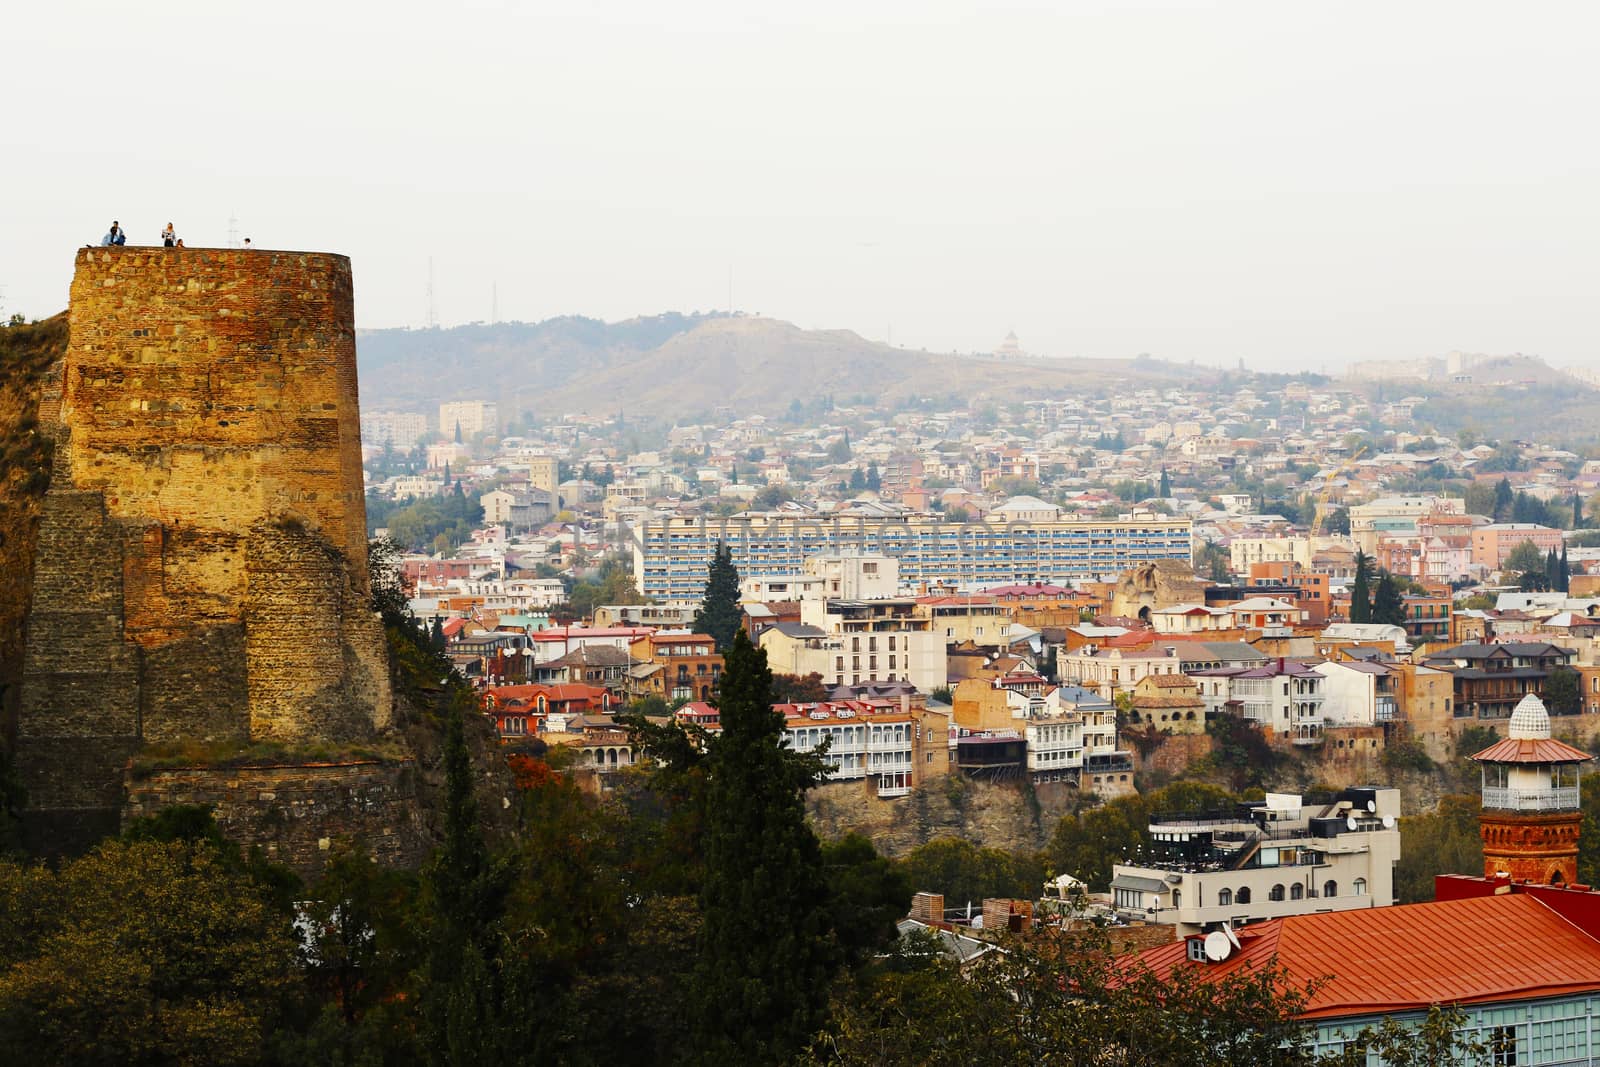 city scape and city view of Tbilisi from Tbilisi botanic garden, Georgia. by Taidundua